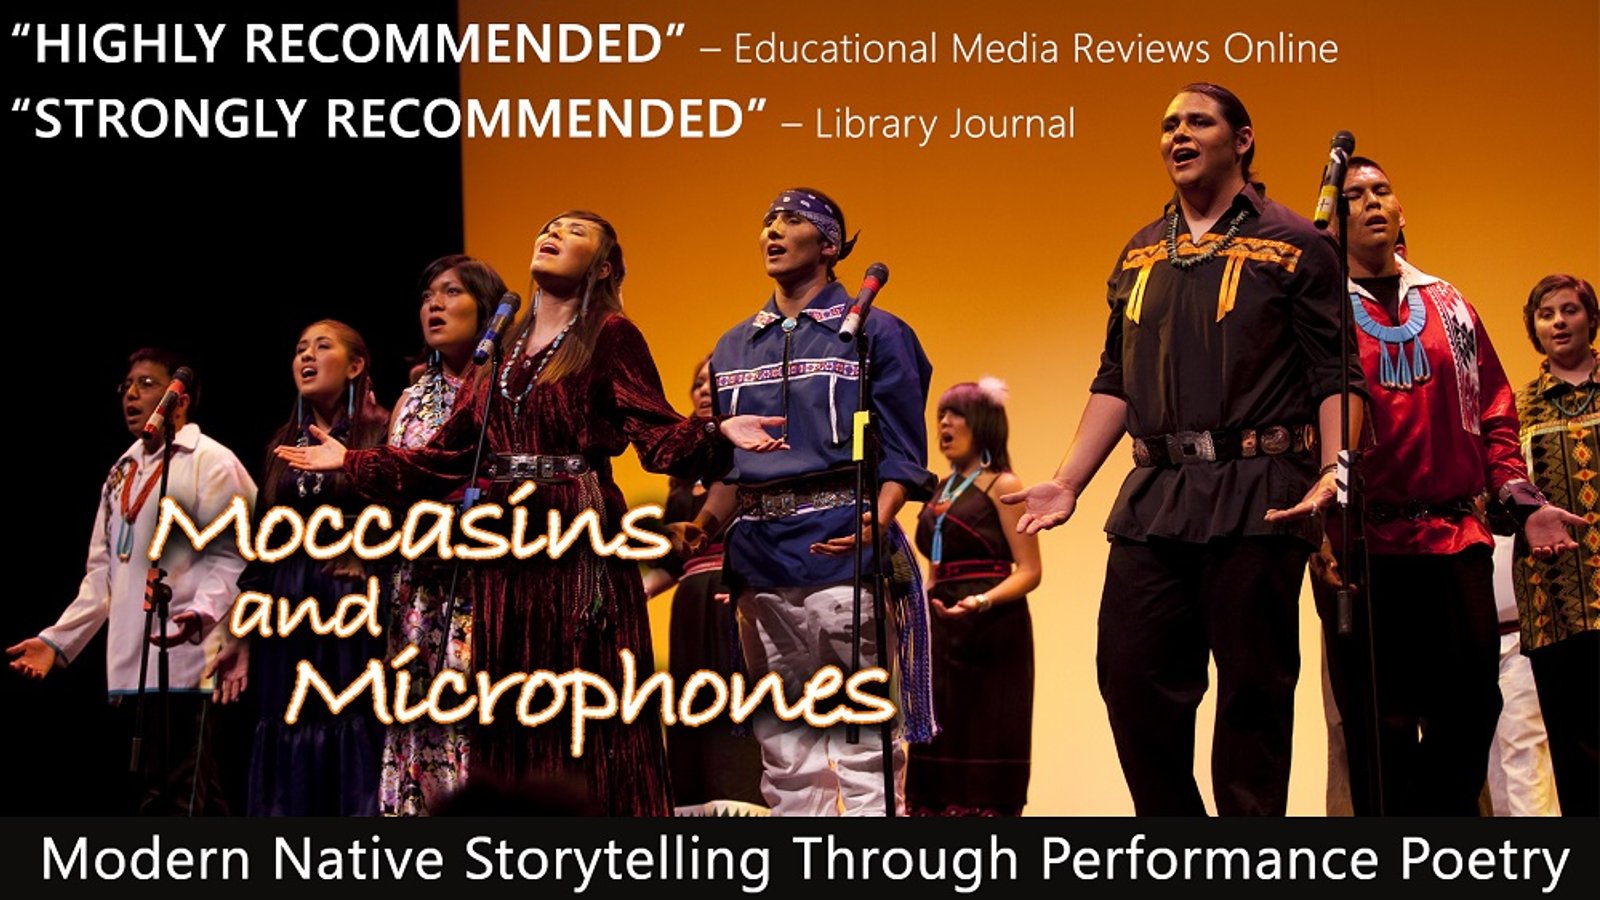 Moccasins And Microphones - Modern Native American Storytelling Through Performance Poetry